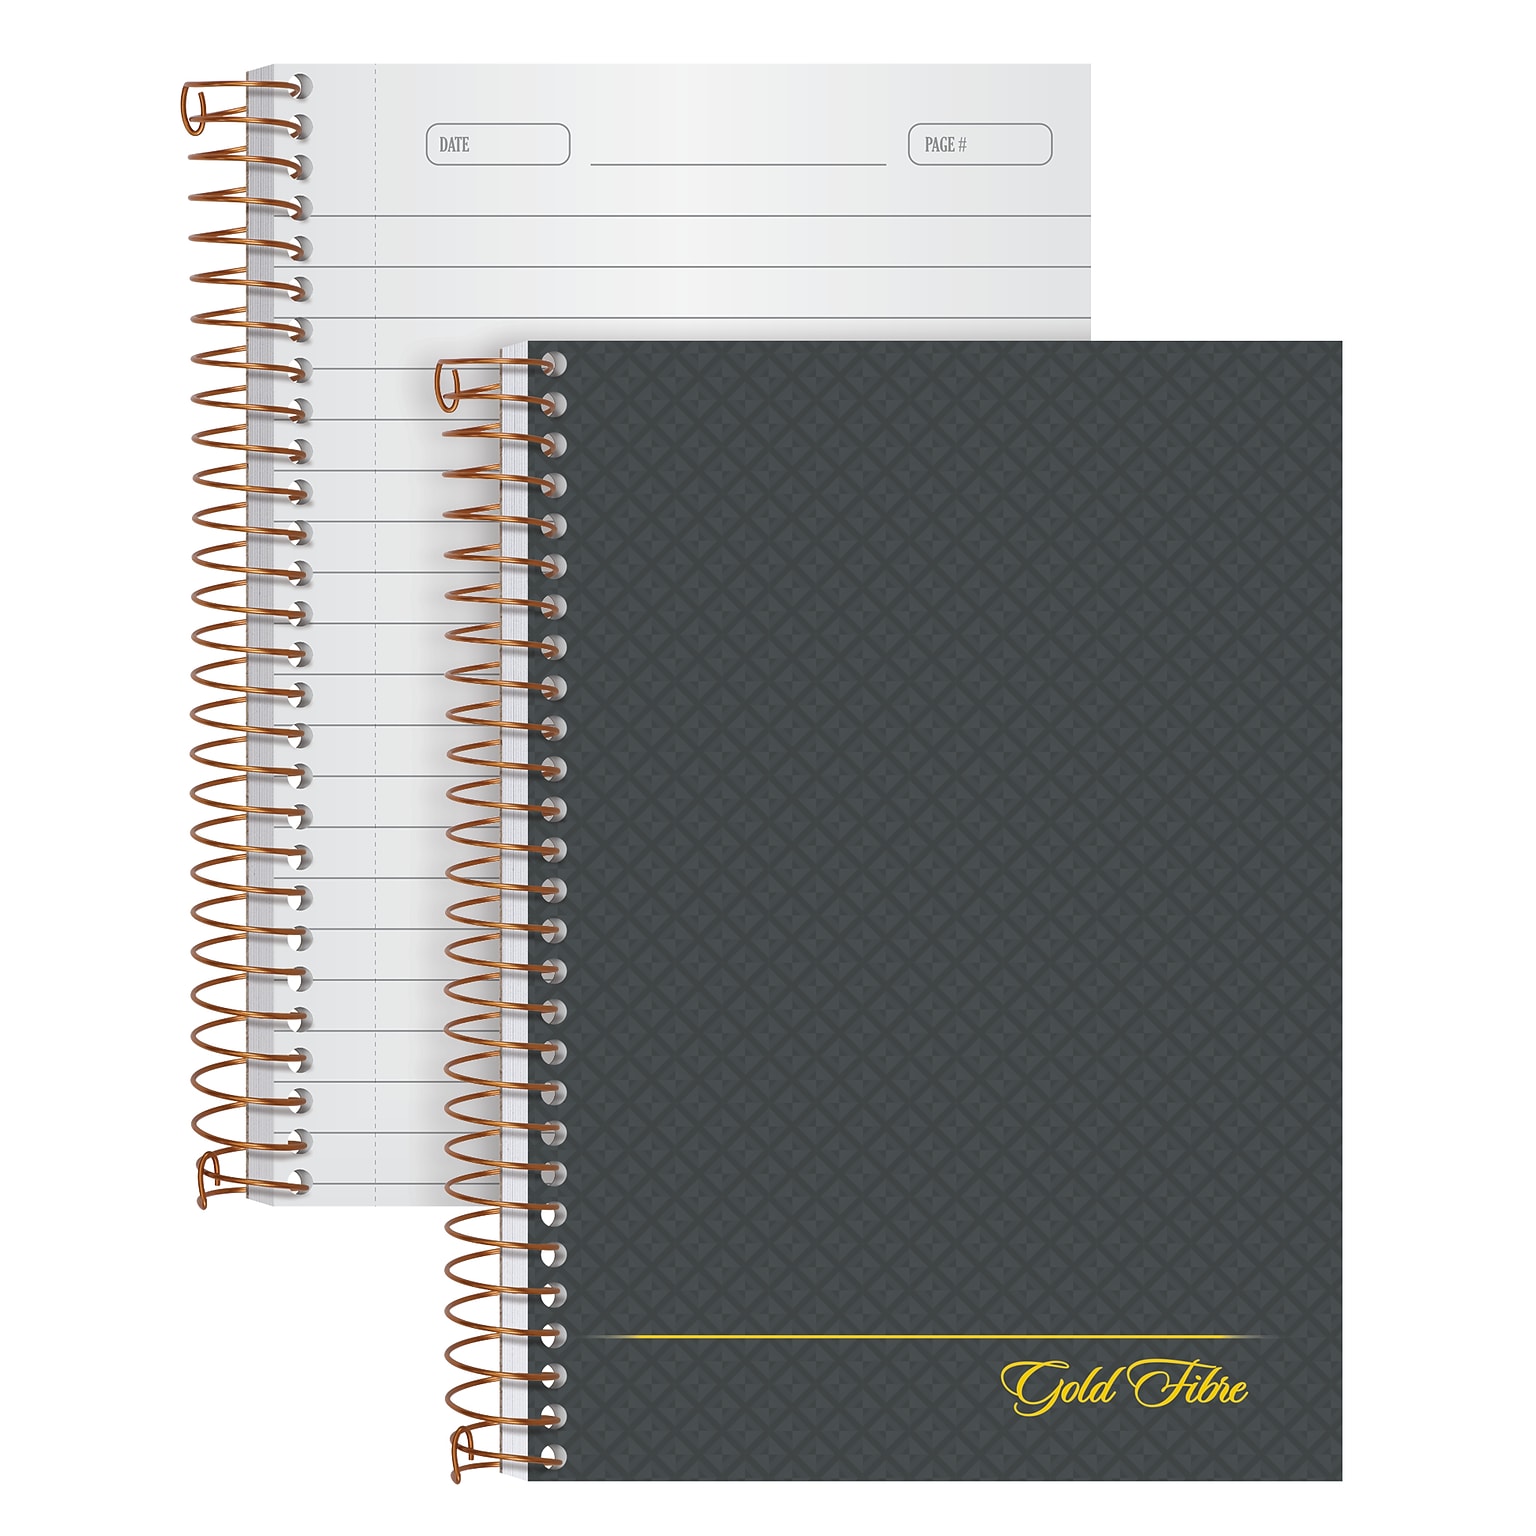 Ampad Gold Fibre Personal Notebook, 7 x 5, College Ruled, 100 Sheets, Gray (20-803)